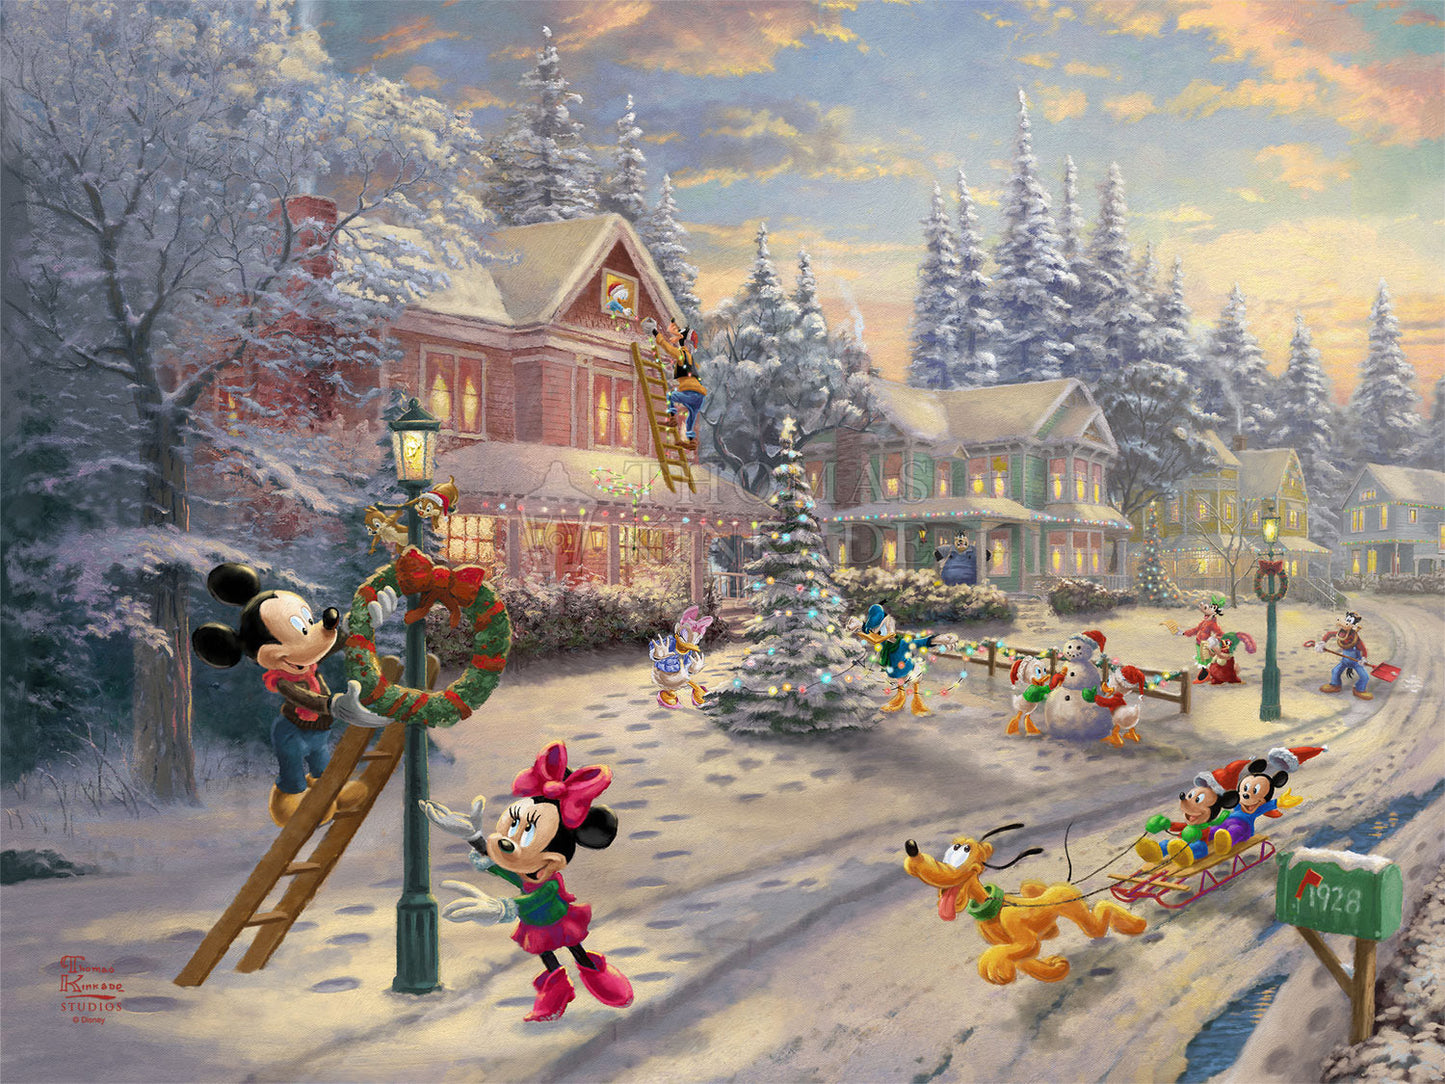 Thomas Kinkade Studios "Mickey's Victorian Christmas" Limited and Open Canvas Giclee